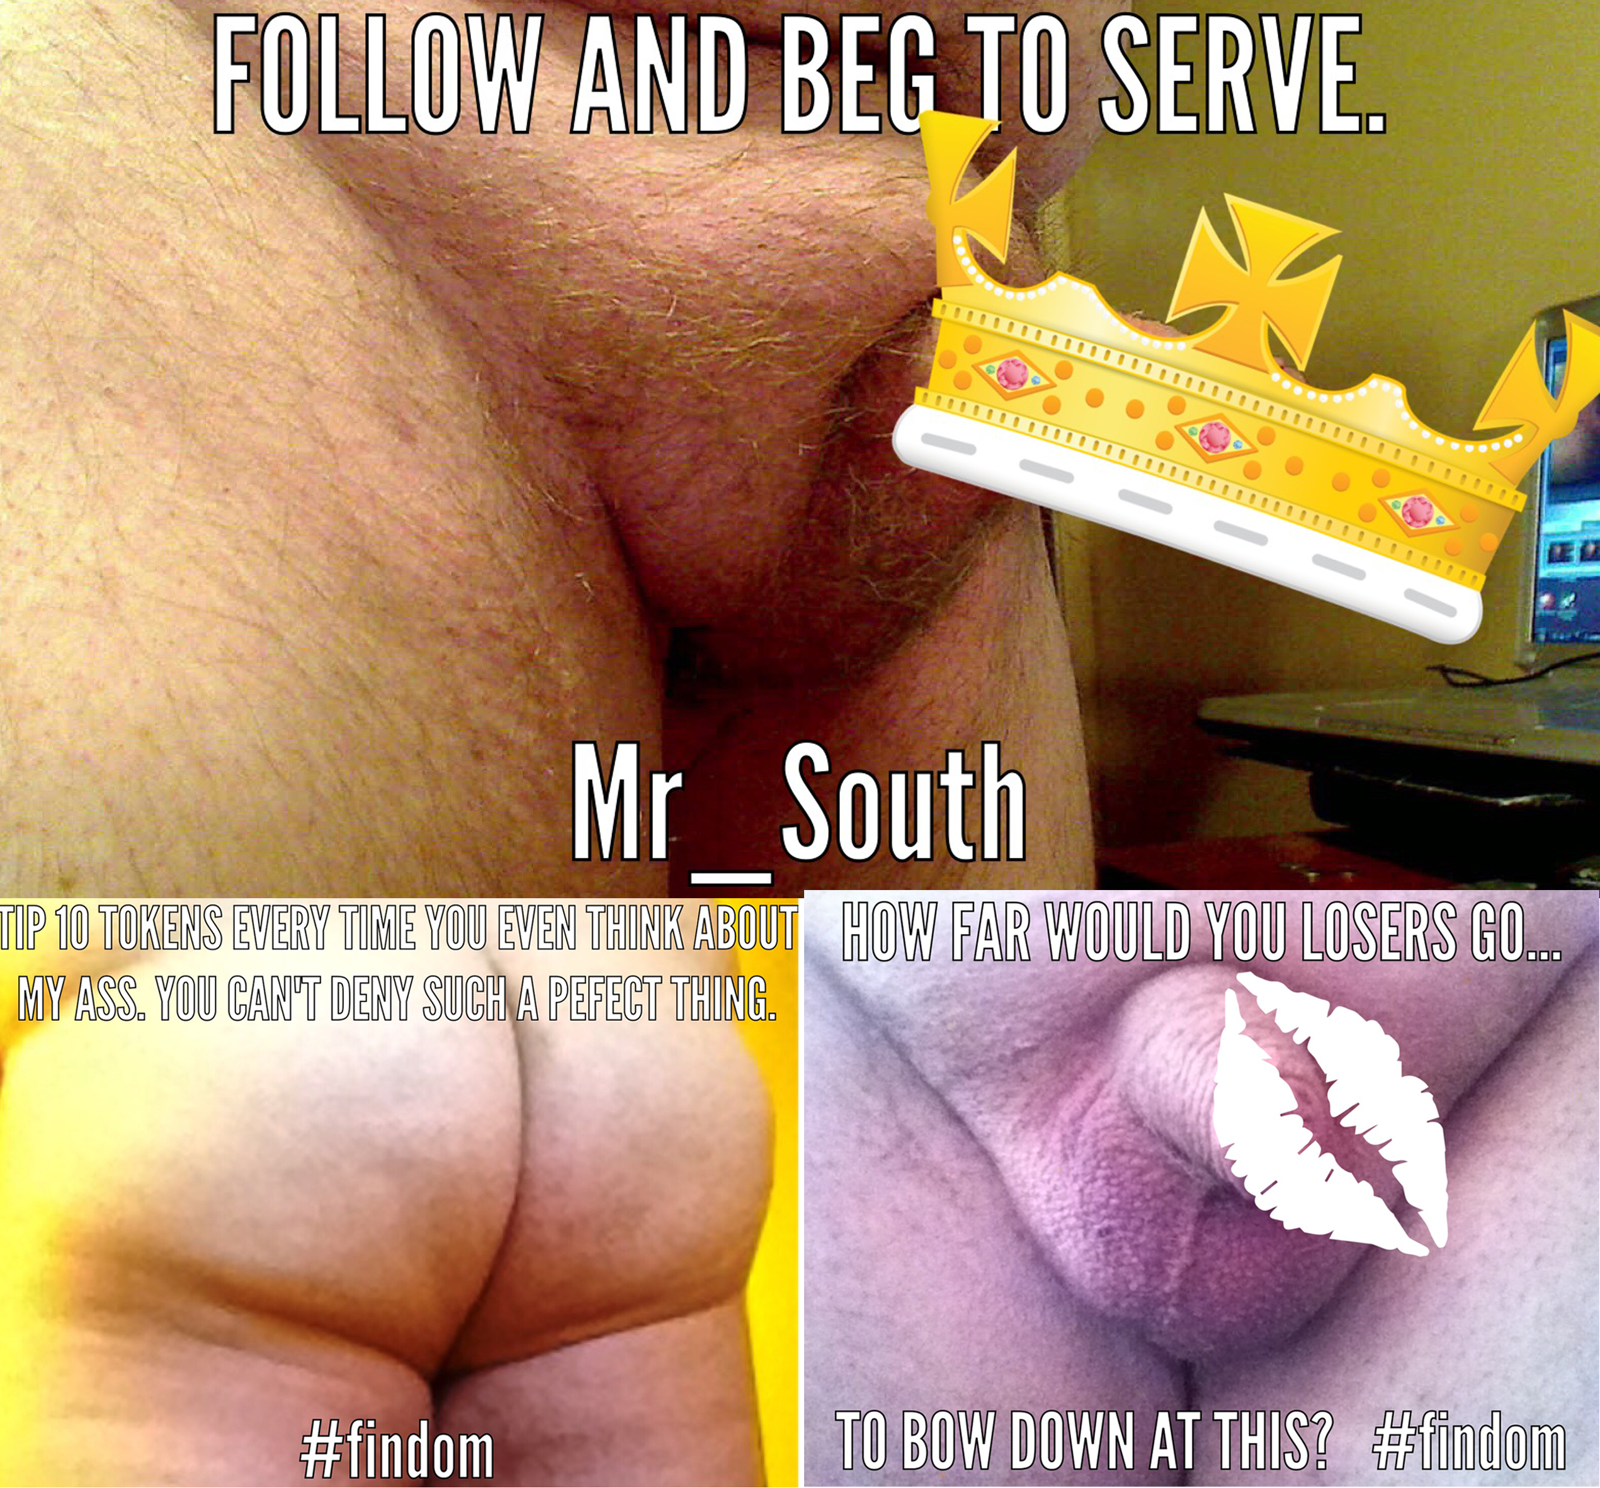 Watch the Photo by MrAlSouth with the username @MrAlSouth, who is a star user, posted on December 7, 2019 and the text says 'Findom Friday. Leave your tributes here. 
www.onlyfans.com/mr_south
www.MrAlSouth.manyvids.com
#FindomFriday #Webcams #OnlyFans #ManyVids'